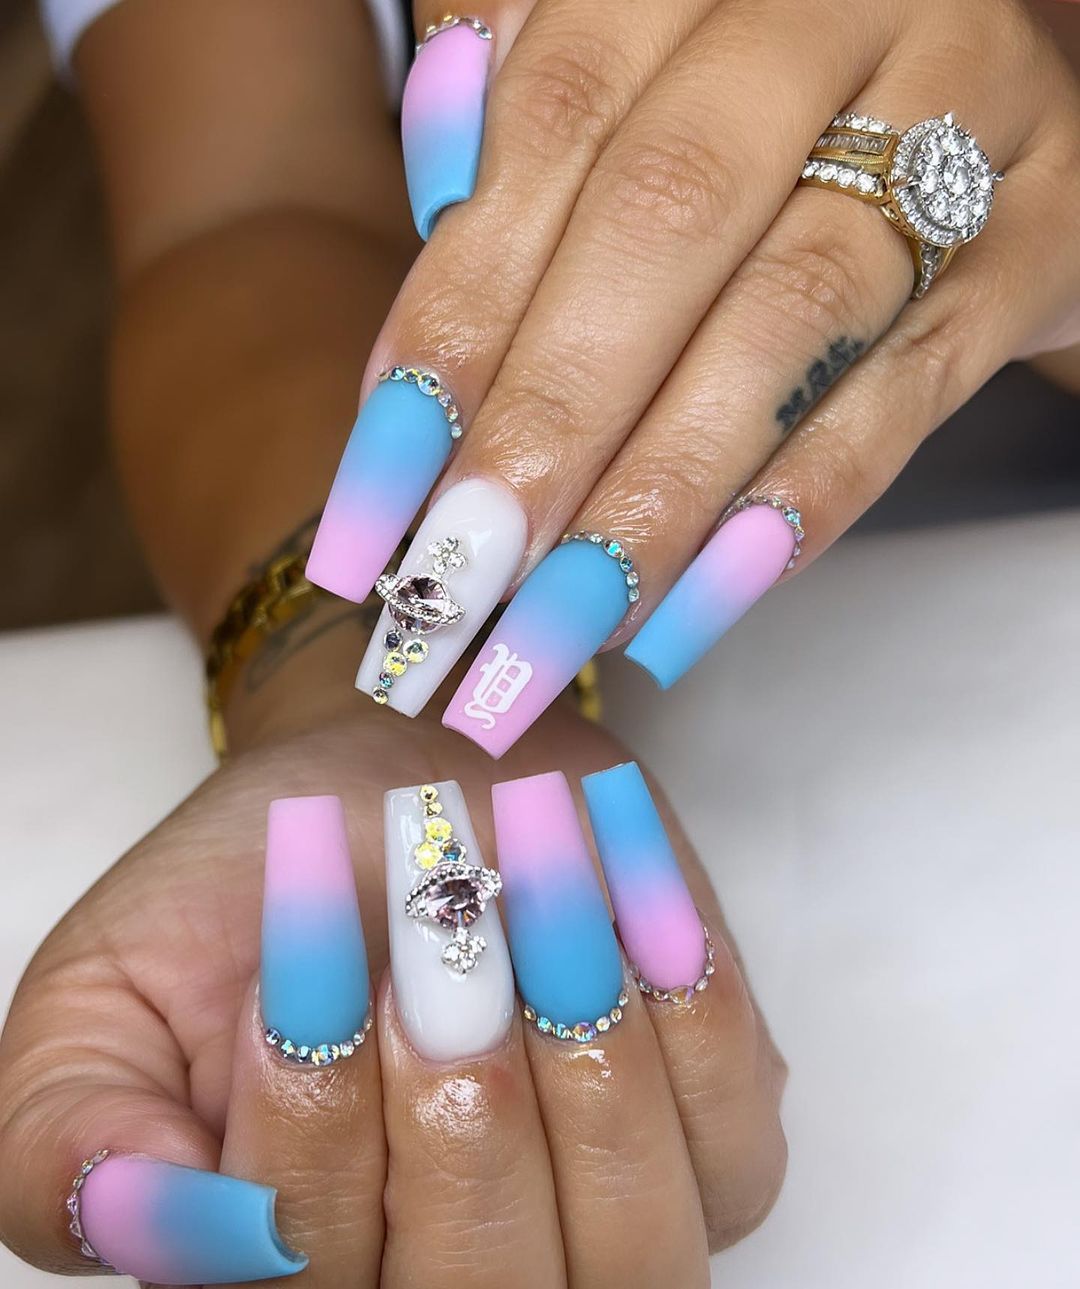 20+ Breathtaking Nail Designs for Your Next Manicure